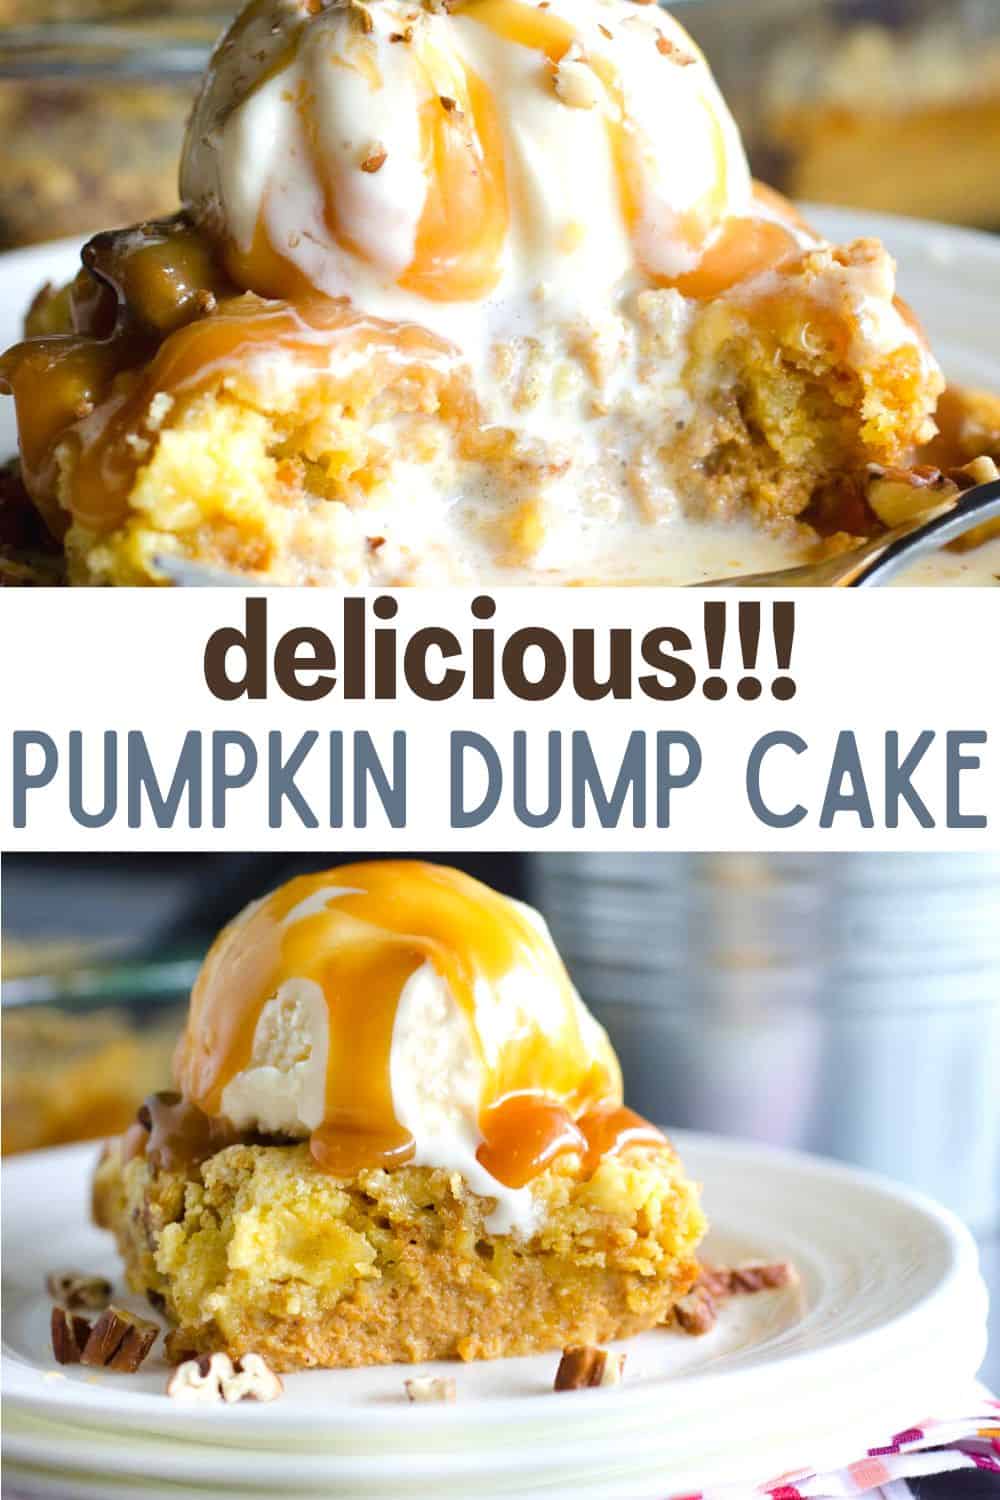 This easy pumpkin dump cake is like a warm delicious pumpkin cobbler. It is a favorite fall dessert served with ice cream and caramel over top. Don't miss this one!